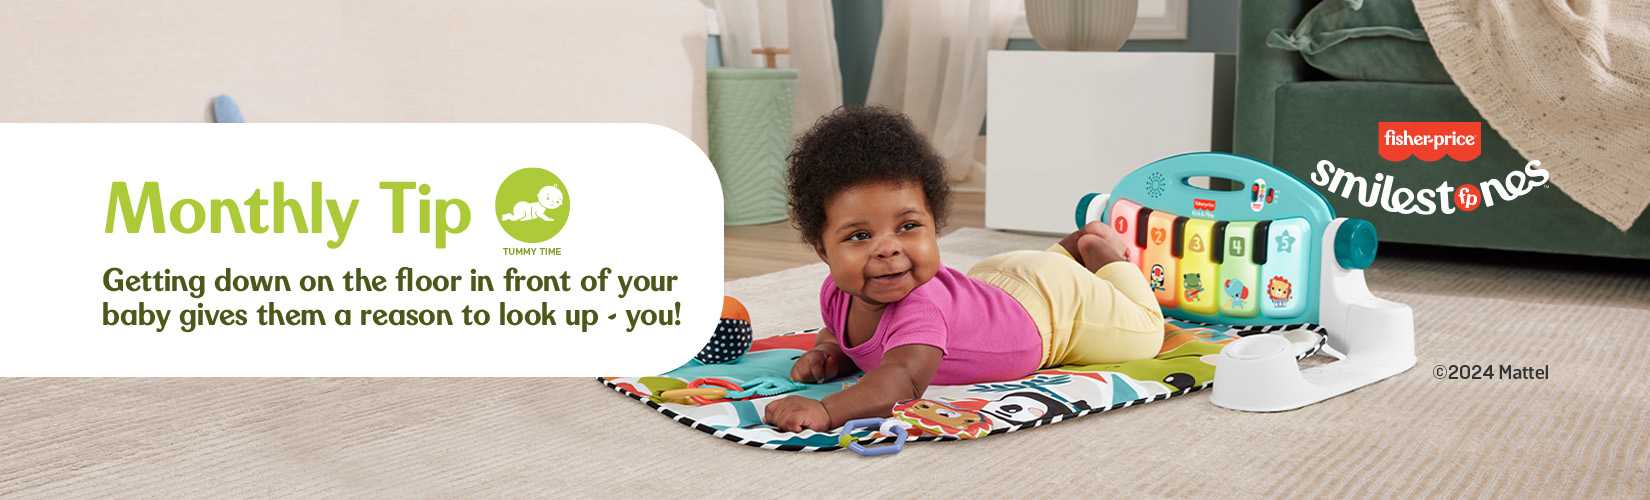 Fisher-price. smilestones. Monthly Tip. Getting down on the floor in front of your baby giaves them a reason to look up- You!